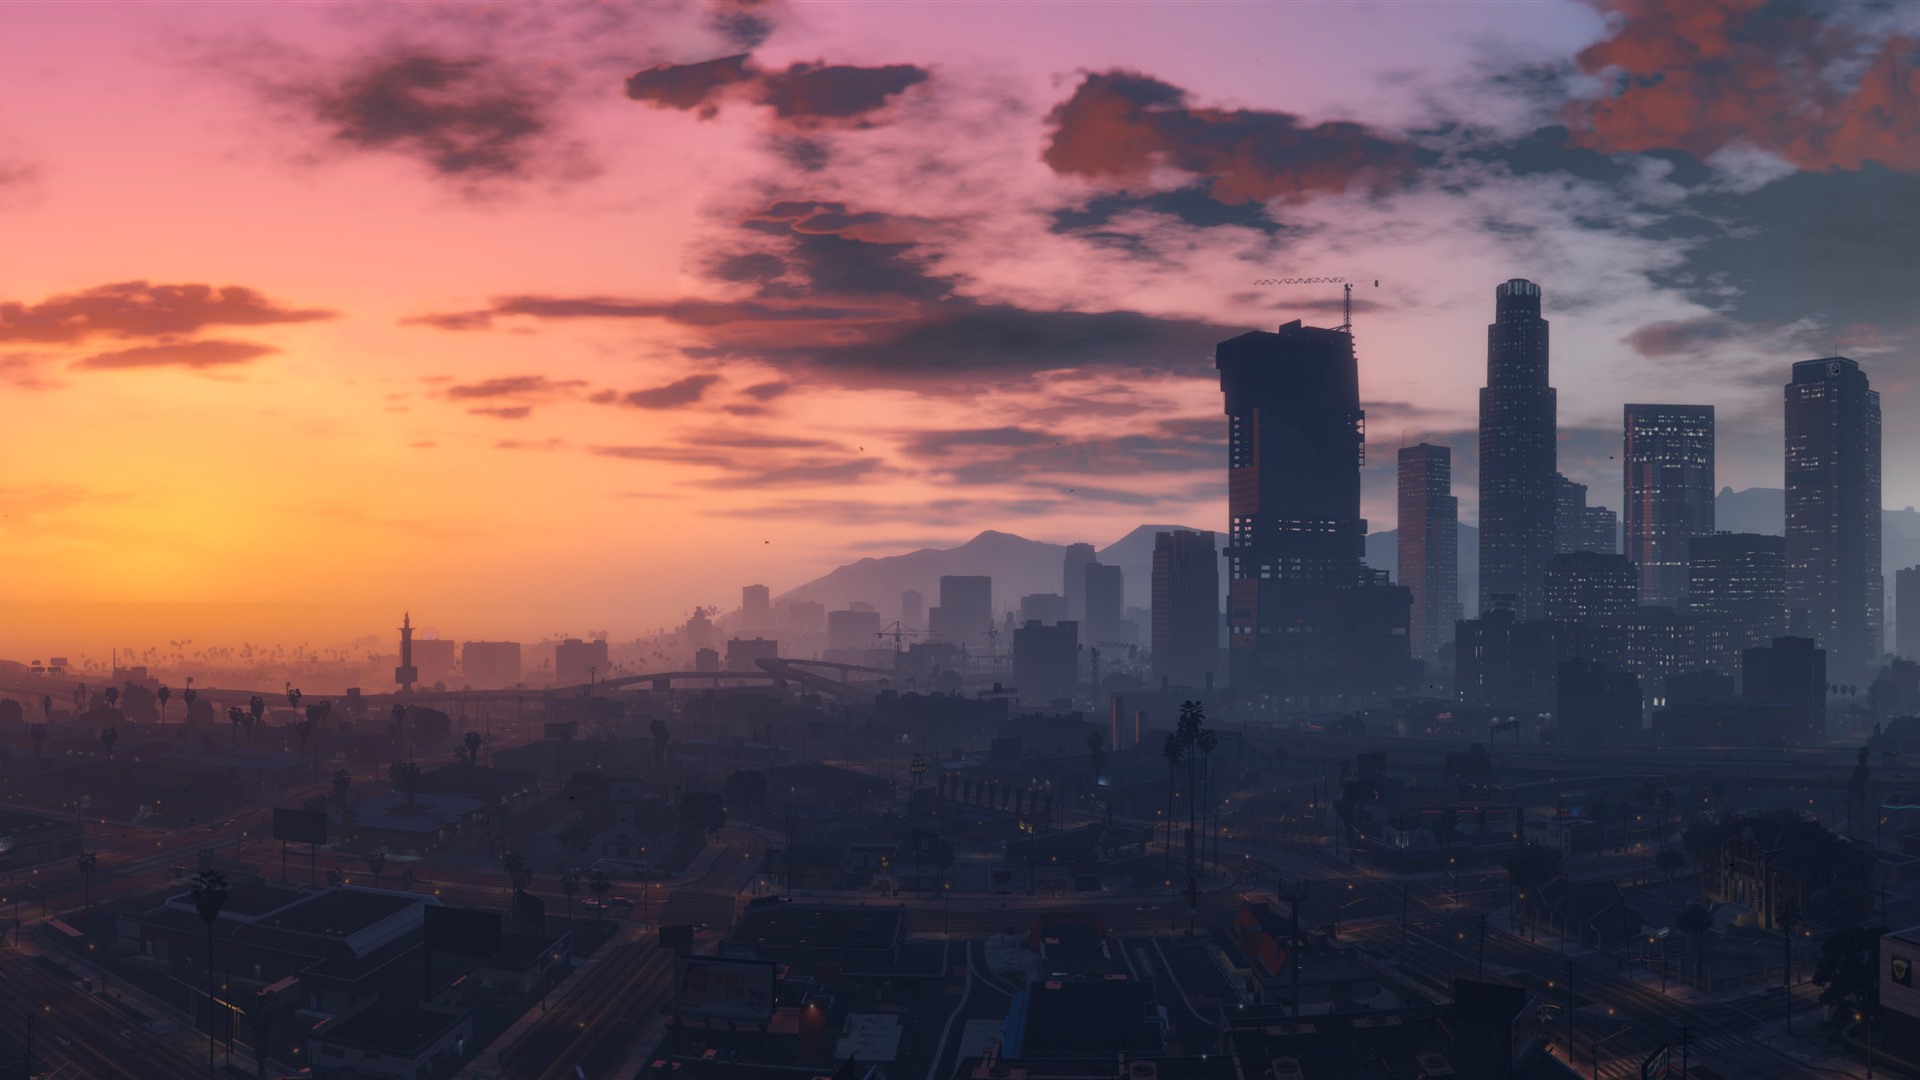 Rockstar Confirms Next Grand Theft Auto Game is Being Developed